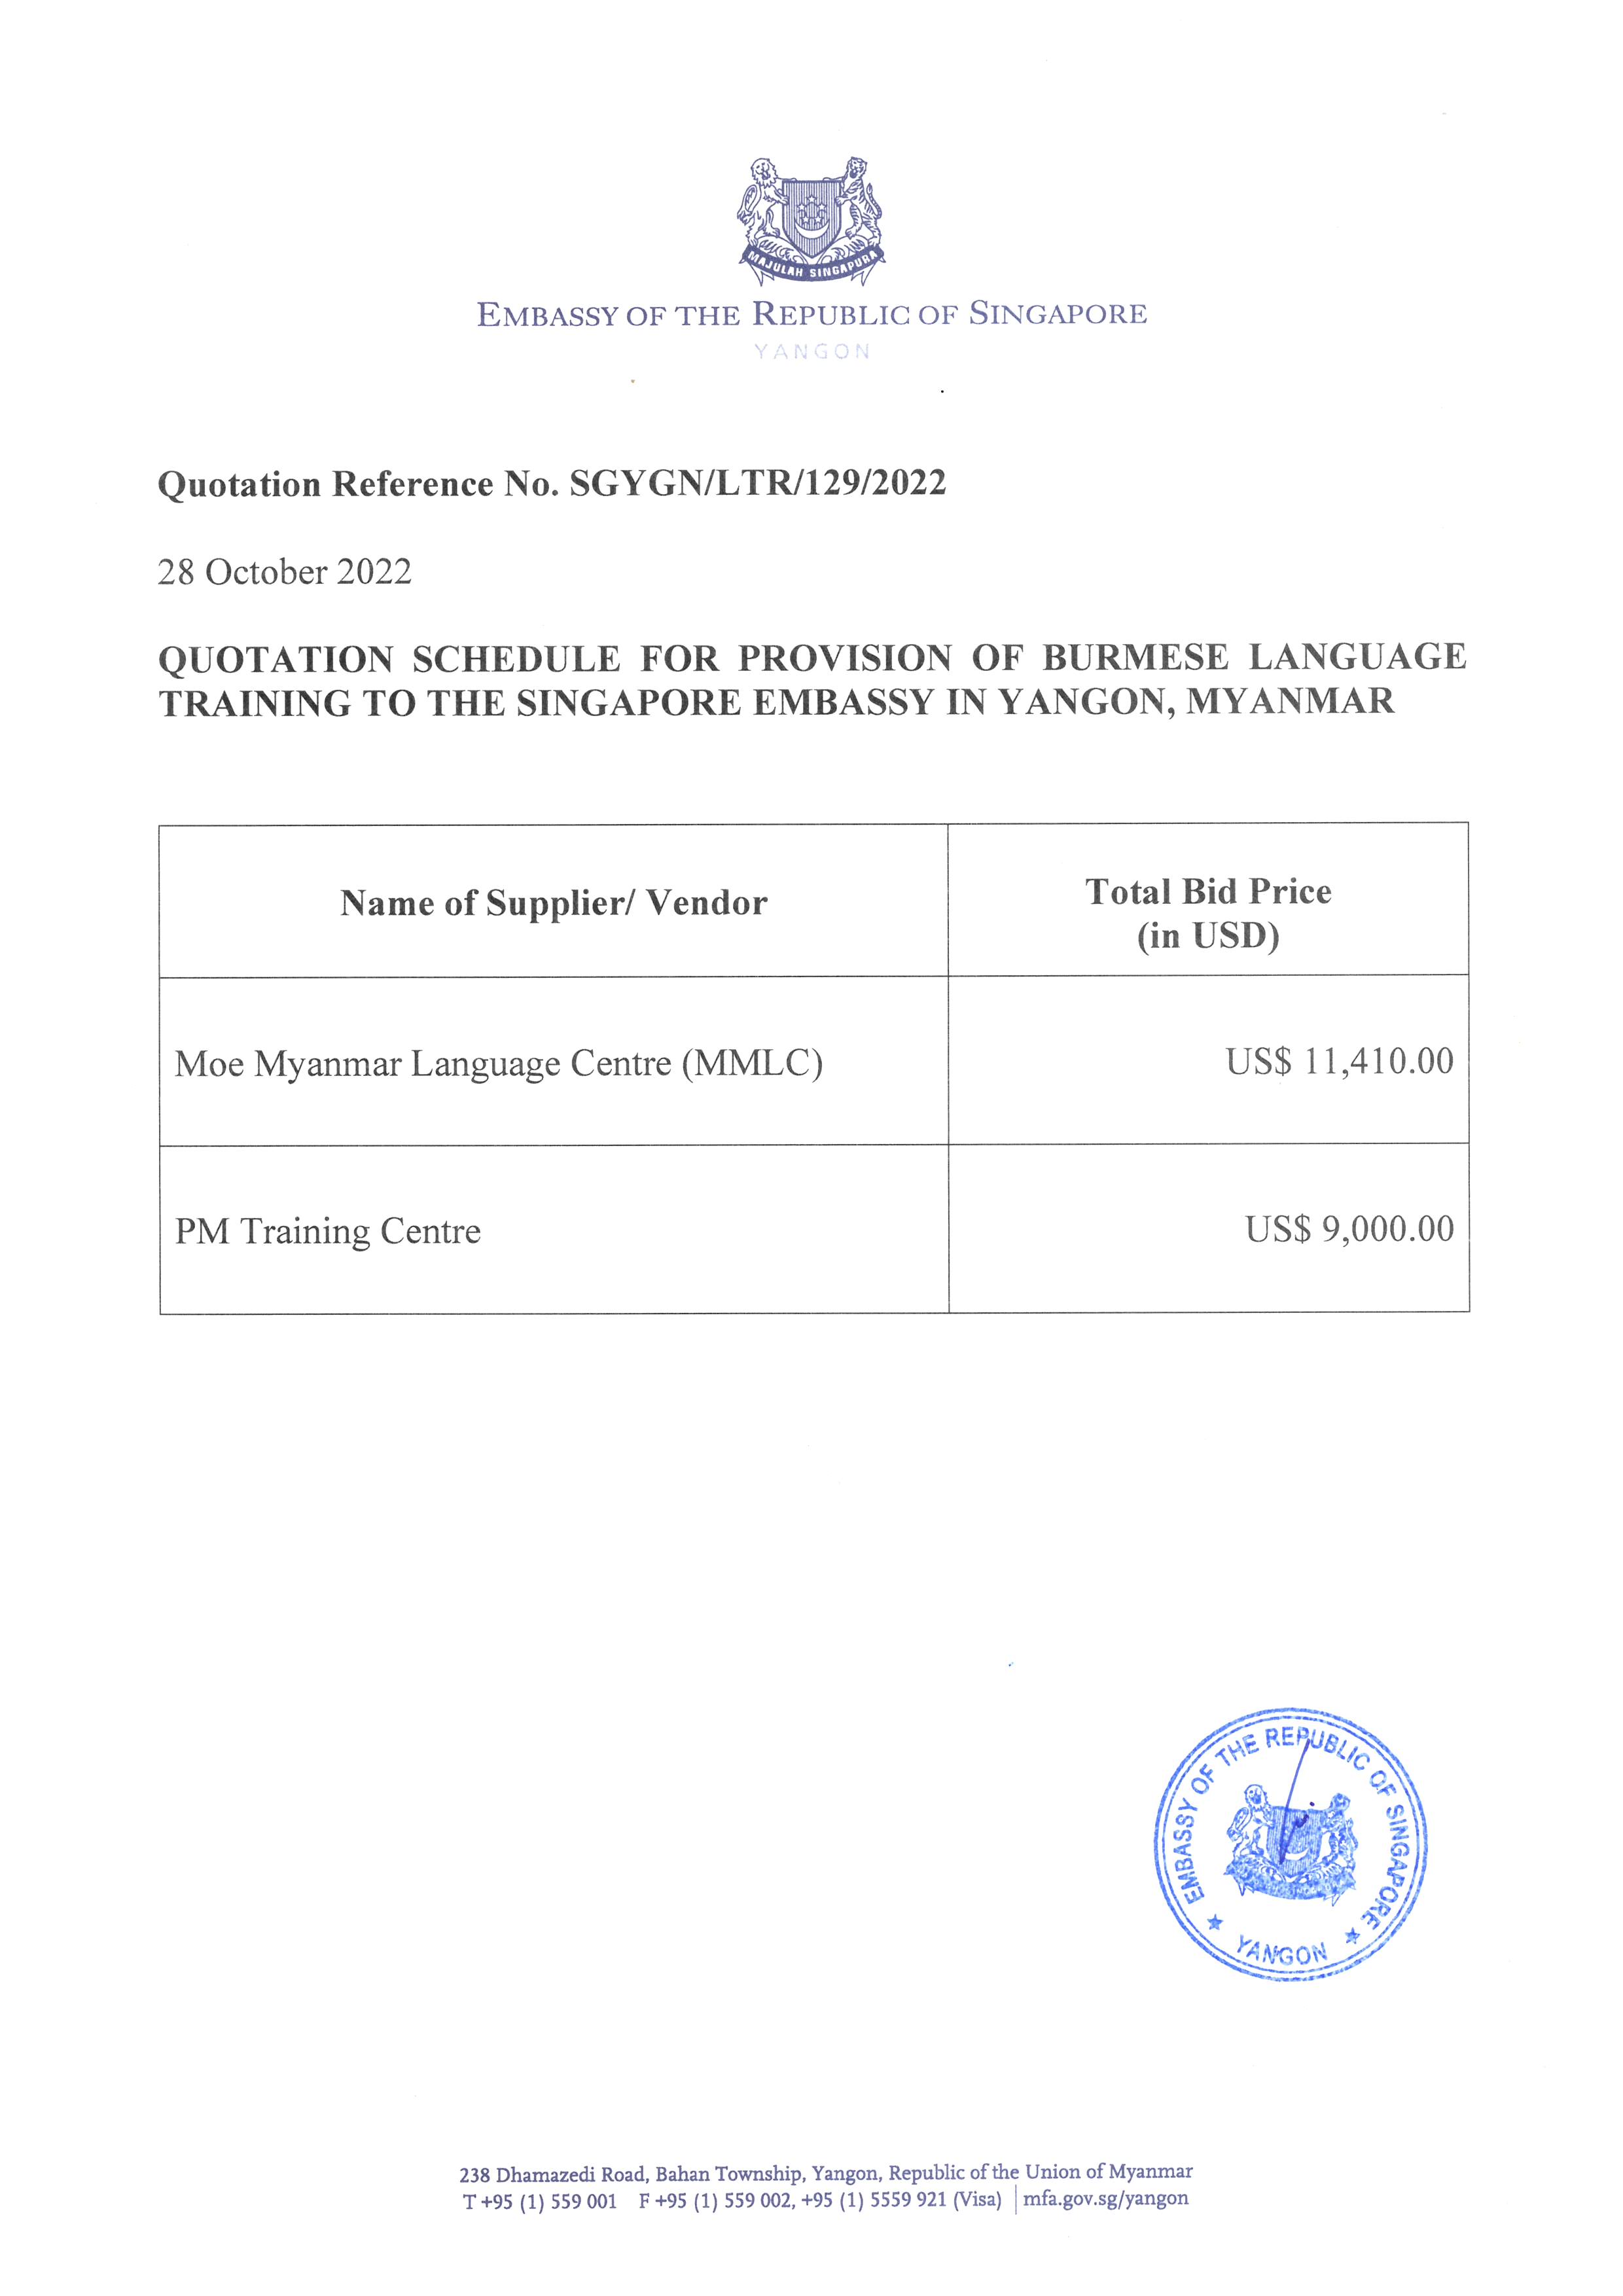 Schedule of Quotations Received-ITQ for Burmese Language Training